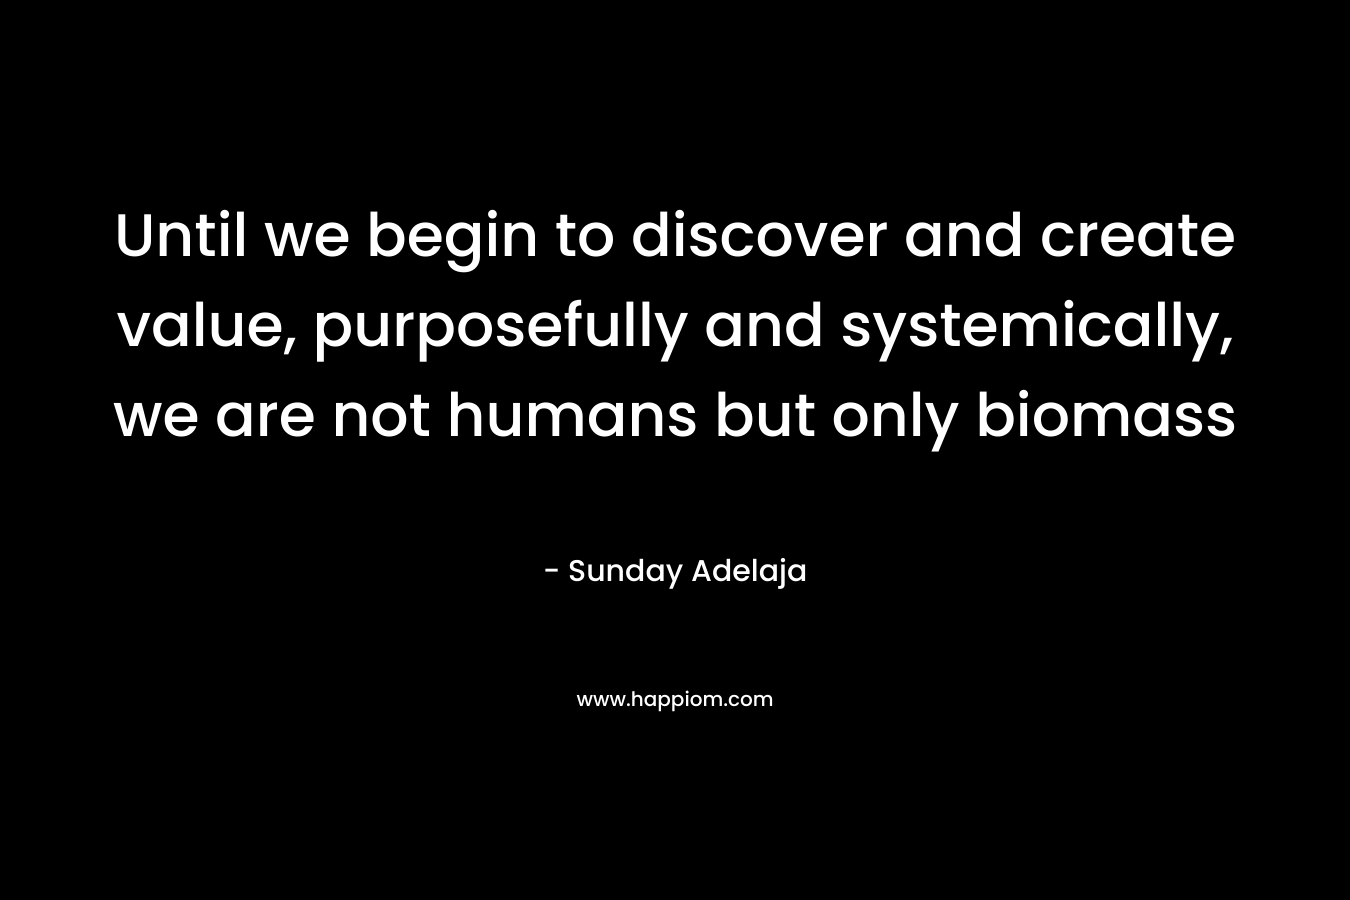 Until we begin to discover and create value, purposefully and systemically, we are not humans but only biomass – Sunday Adelaja